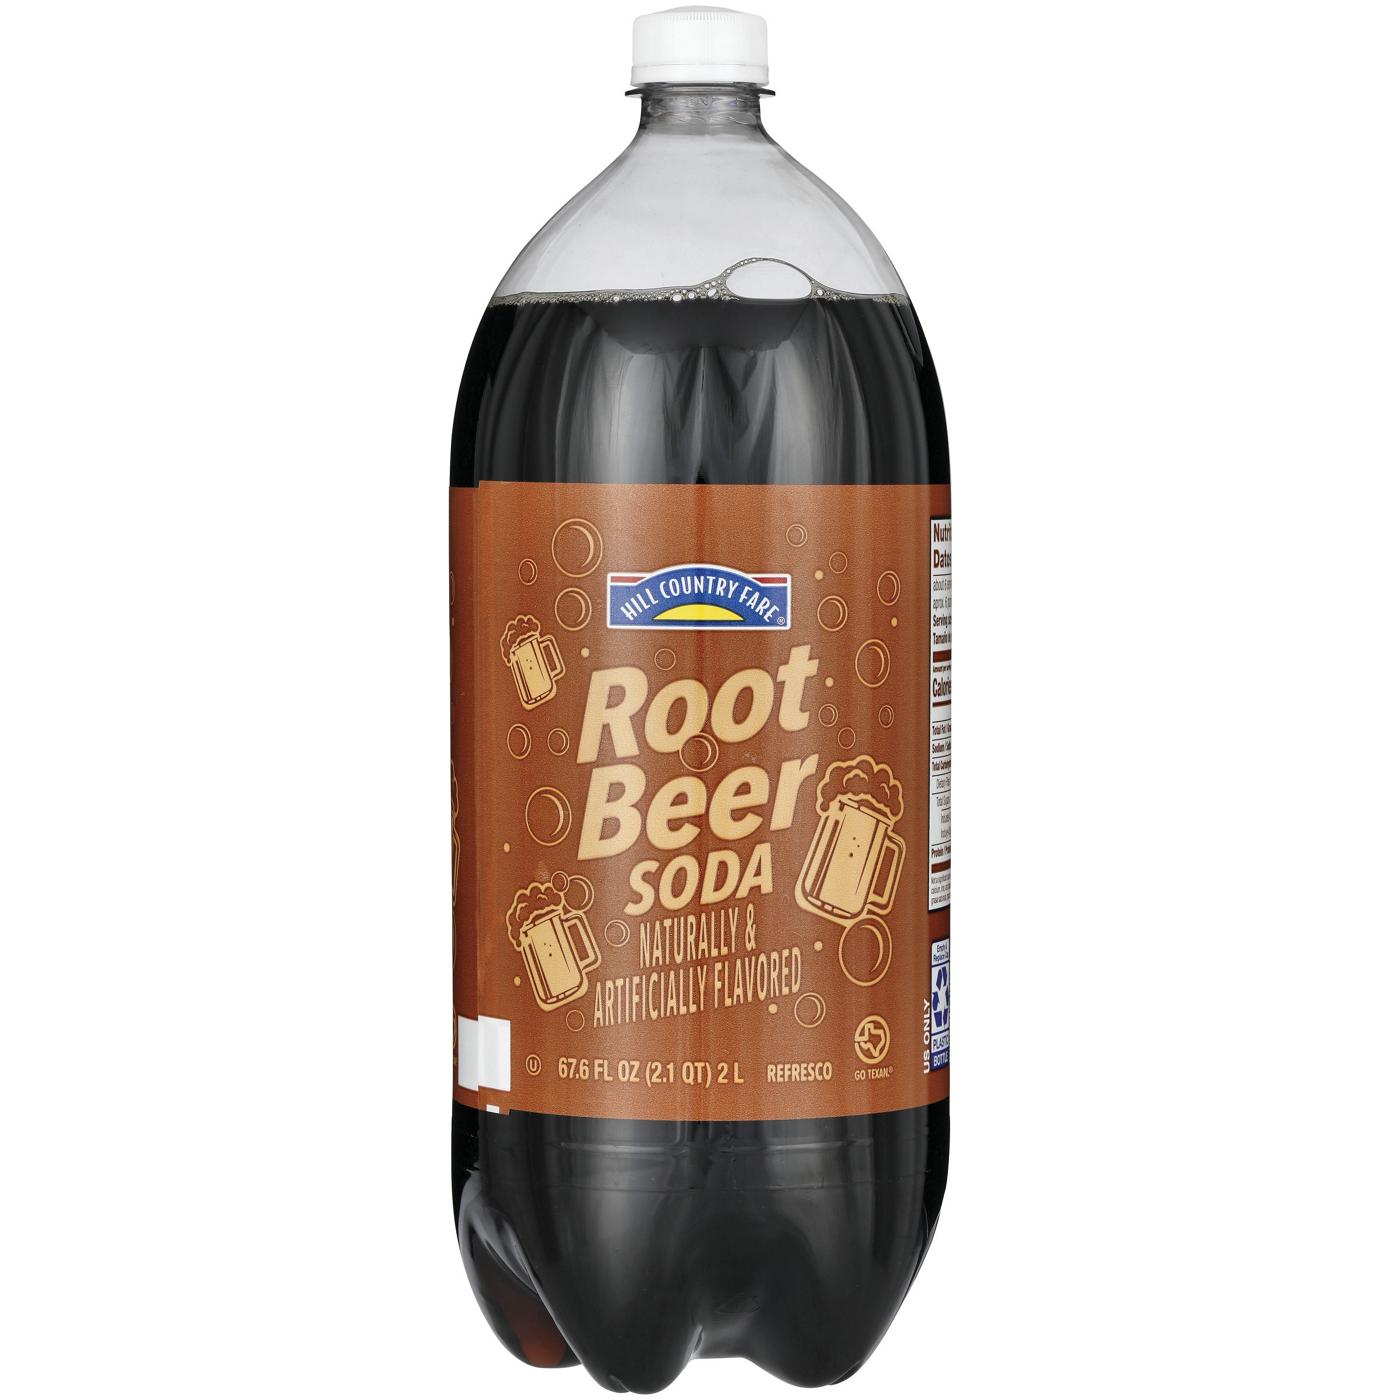 HCF Hill Country Fair Root Beer Soda; image 1 of 2